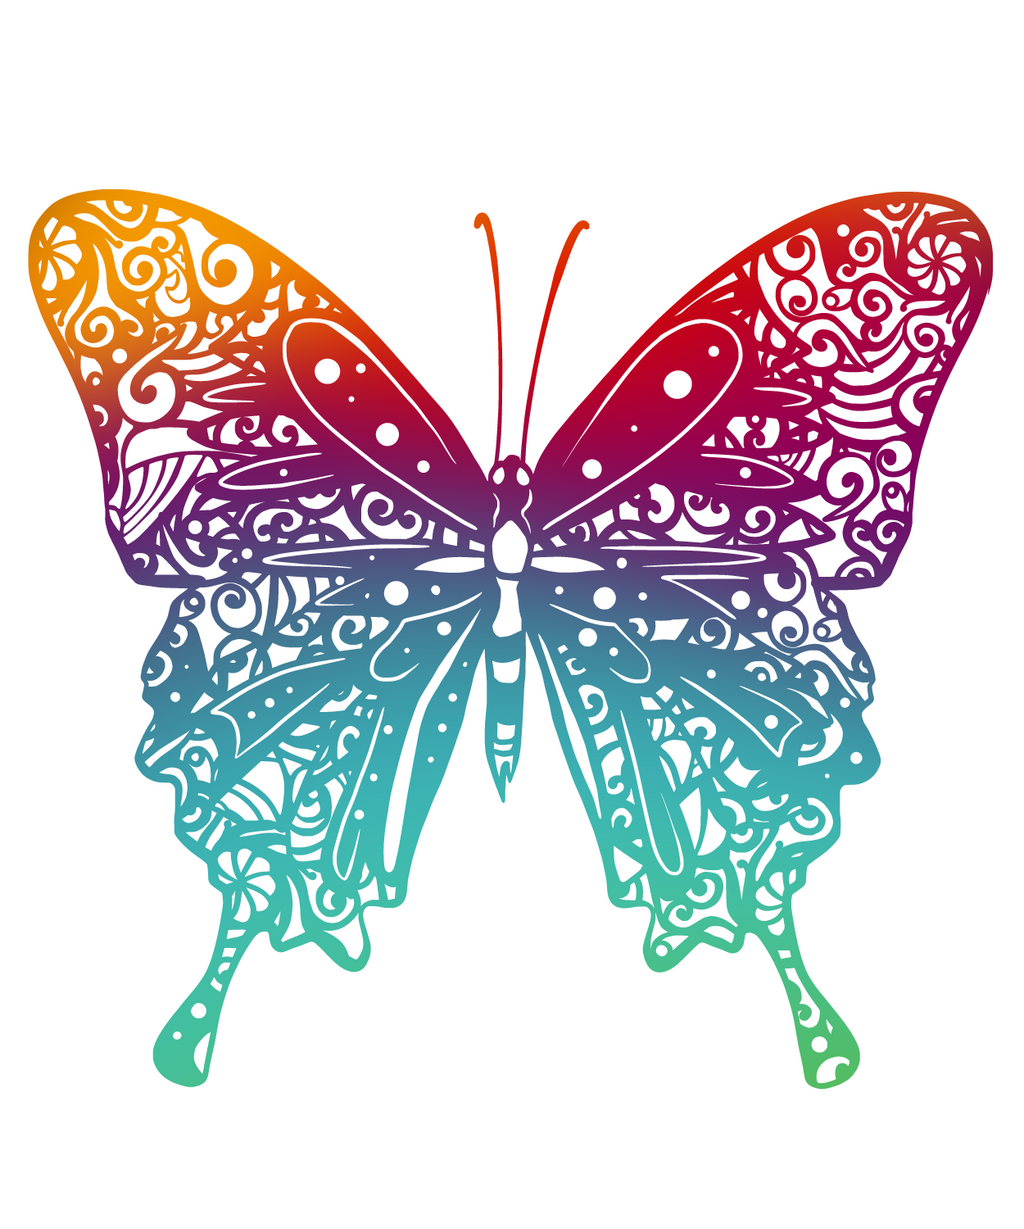 Butterfly 3" Stickers, Stickers - Sciggles